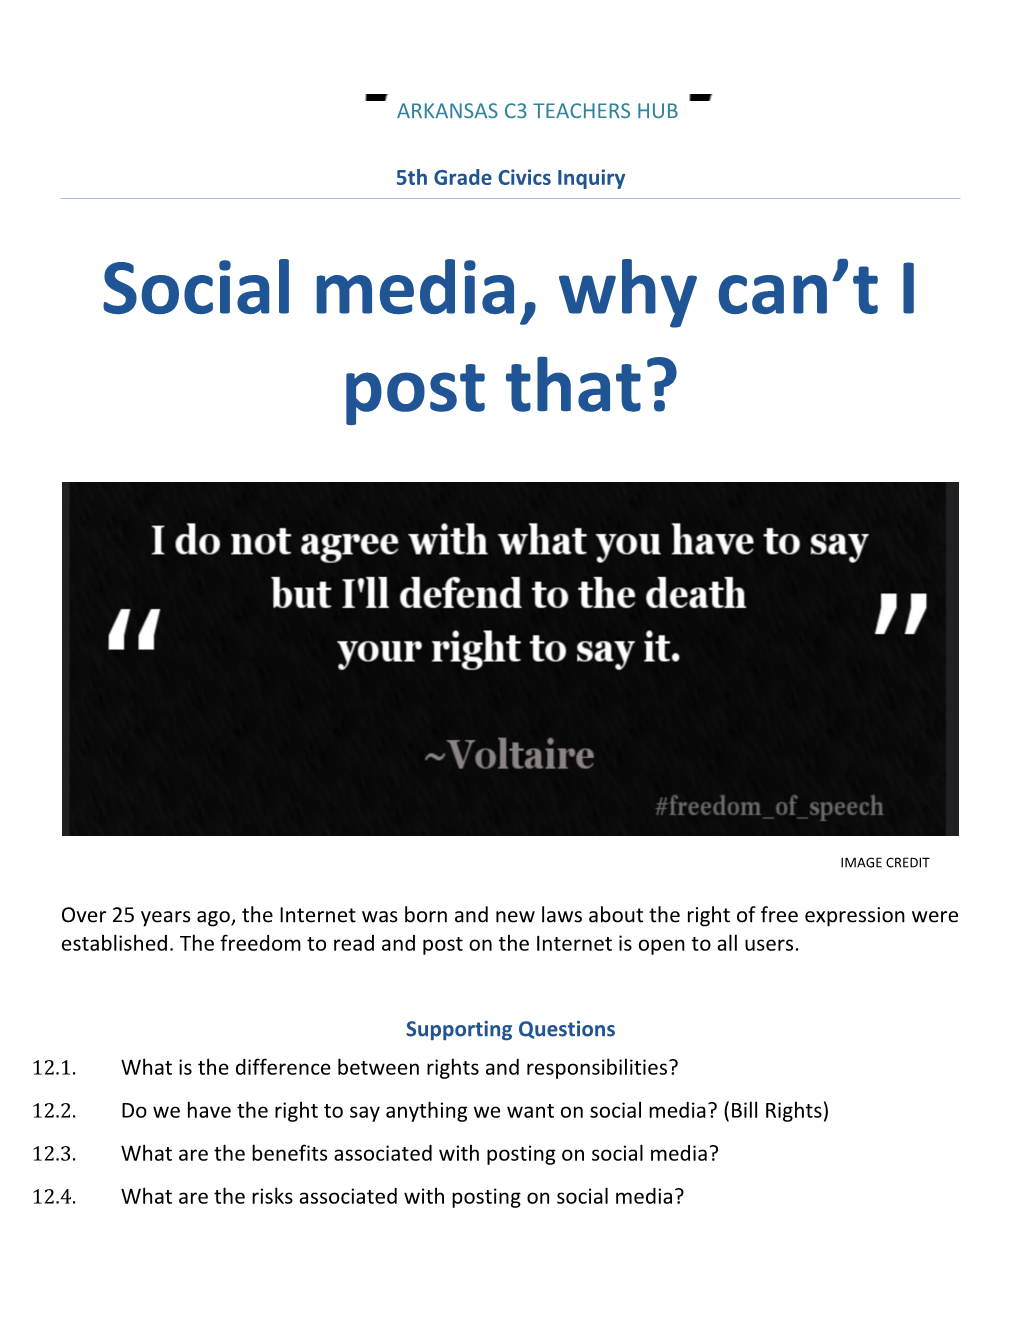 Social Media, Why Can T I Post That?